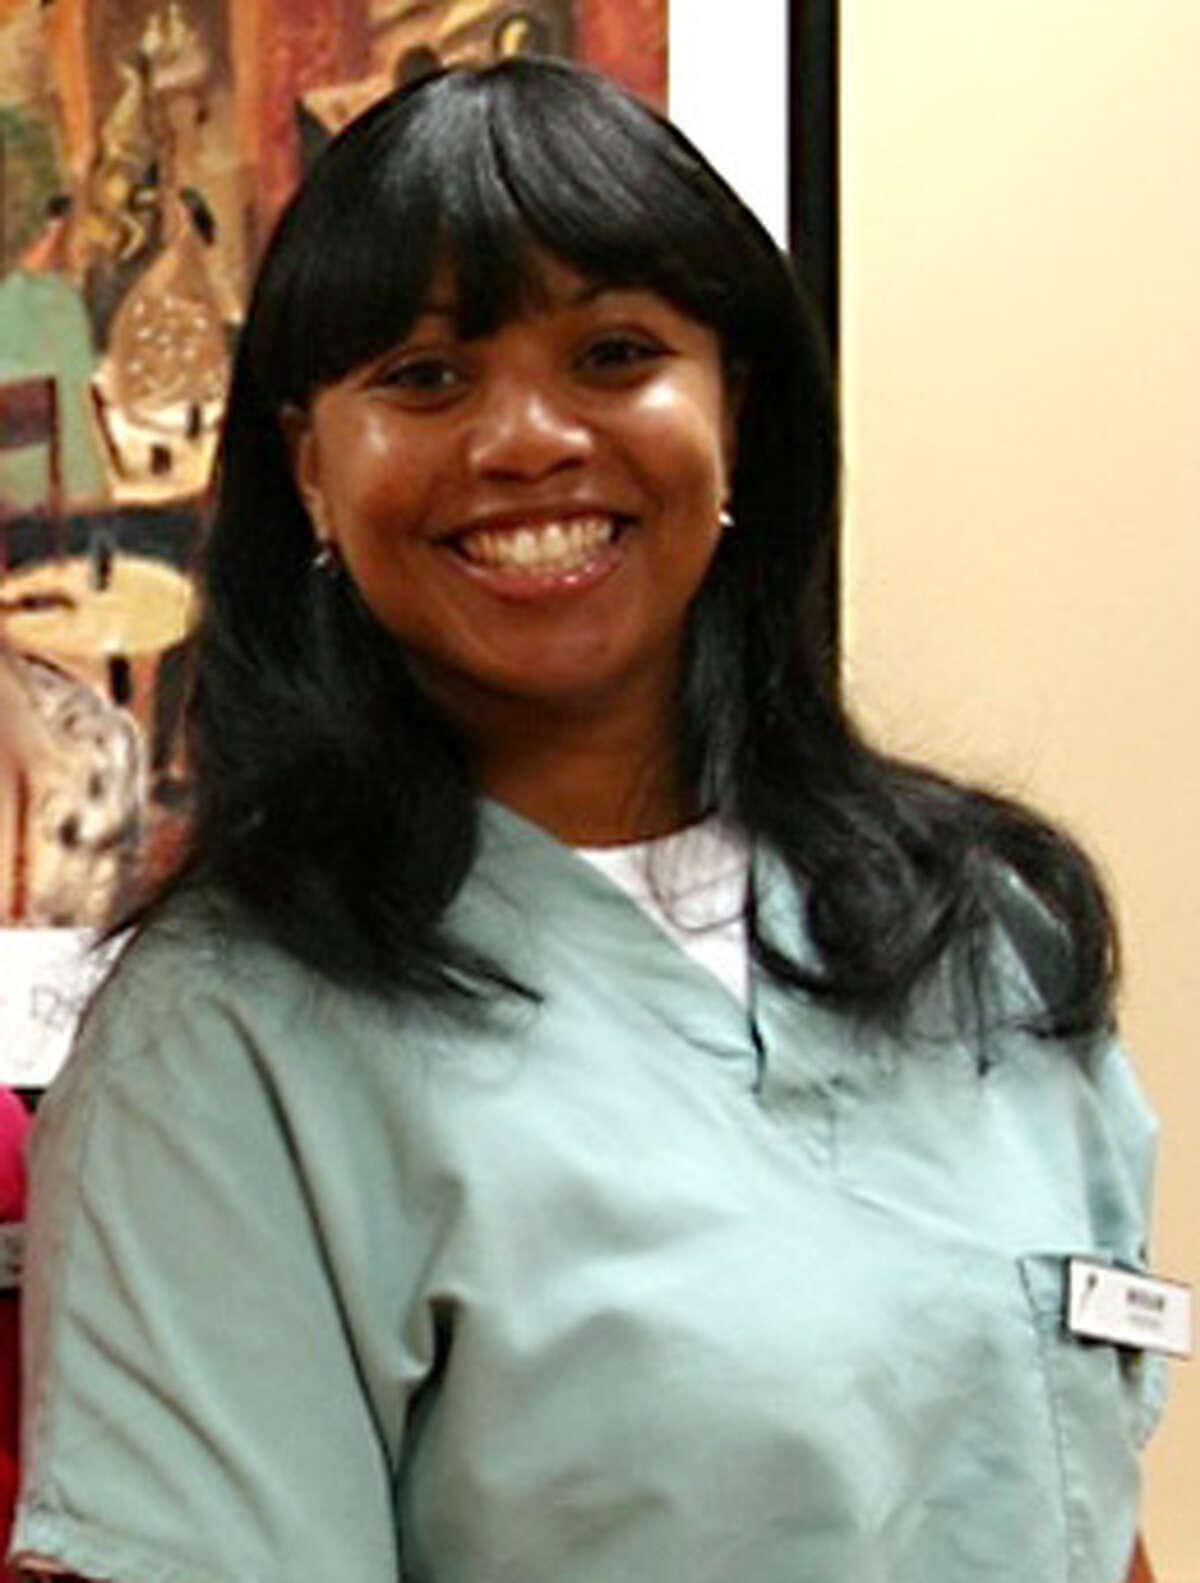 This 2011 photo provided by Dr. Barry Weiss, from the website of Advanced Periodontics in Hamden, Conn., shows former employee Miriam Carey. The 34-year-old Carey was shot to death by police after a car chase that began when she tried to breach a barrier at the White House.